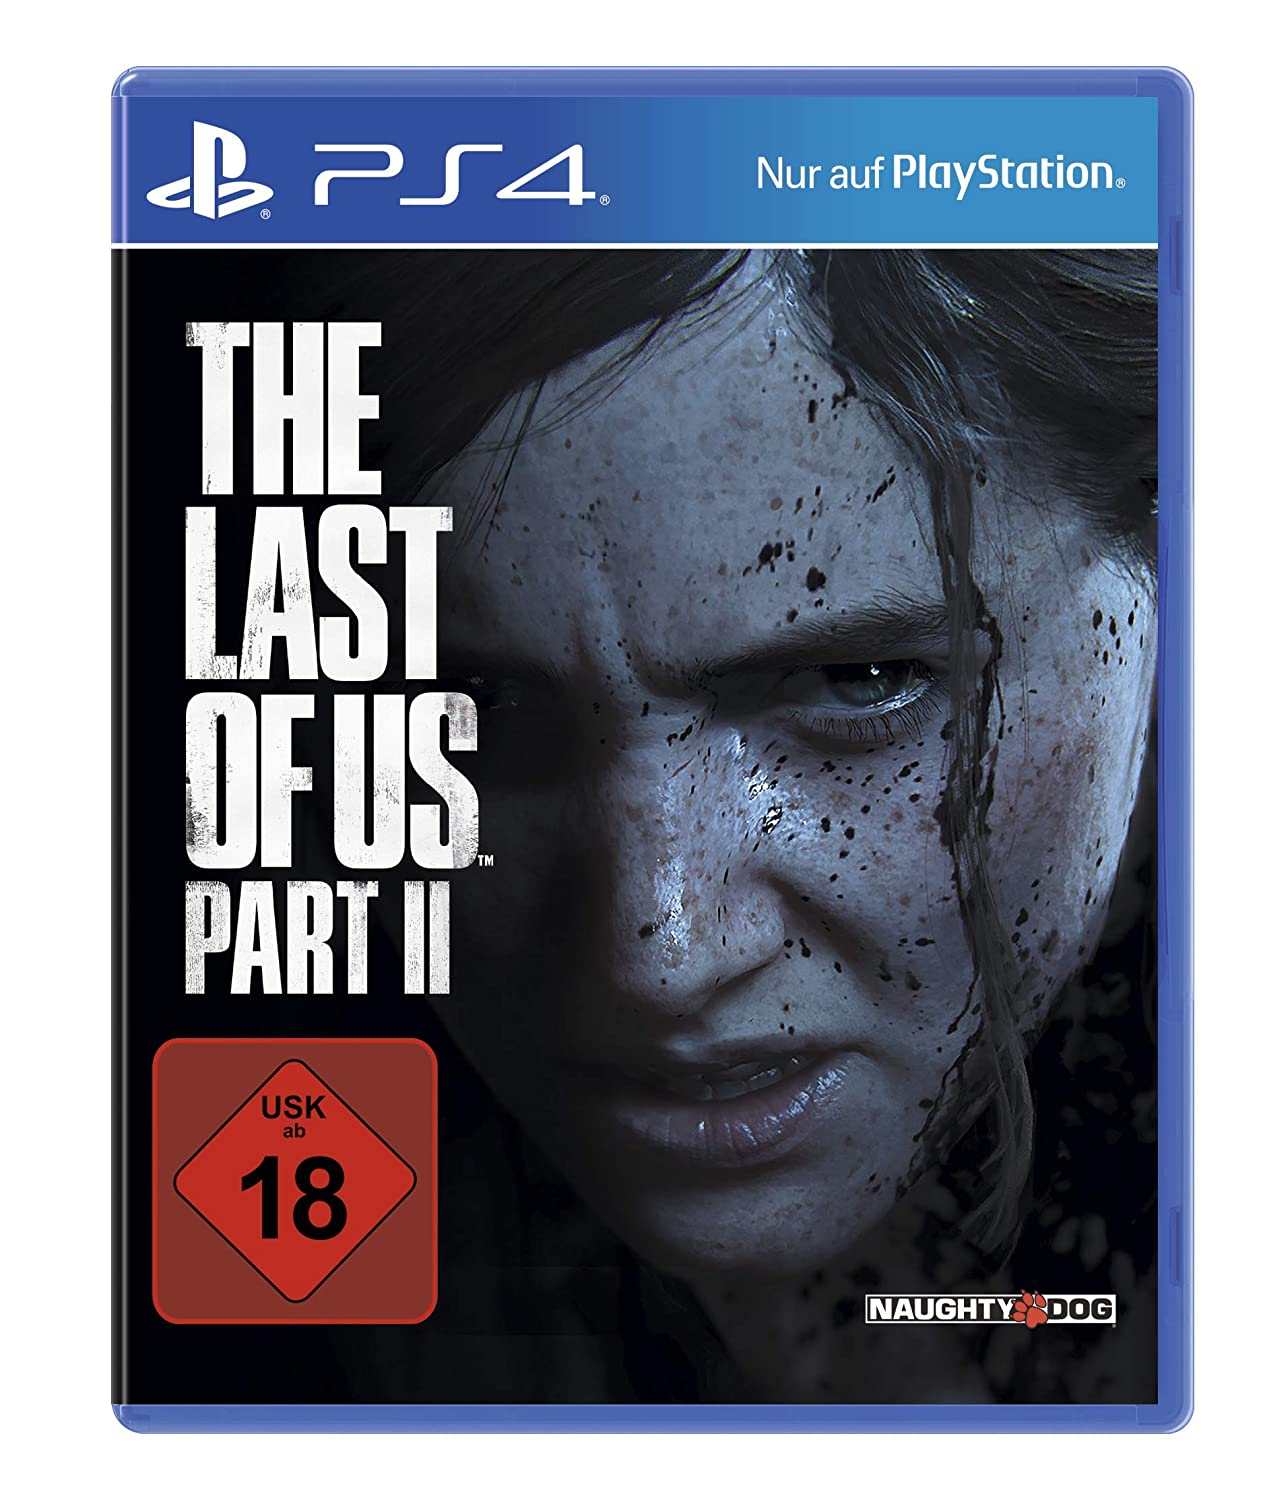 Abby's redemption arc in The Last of Us Part 2 is the only one that matters  (spoilers)